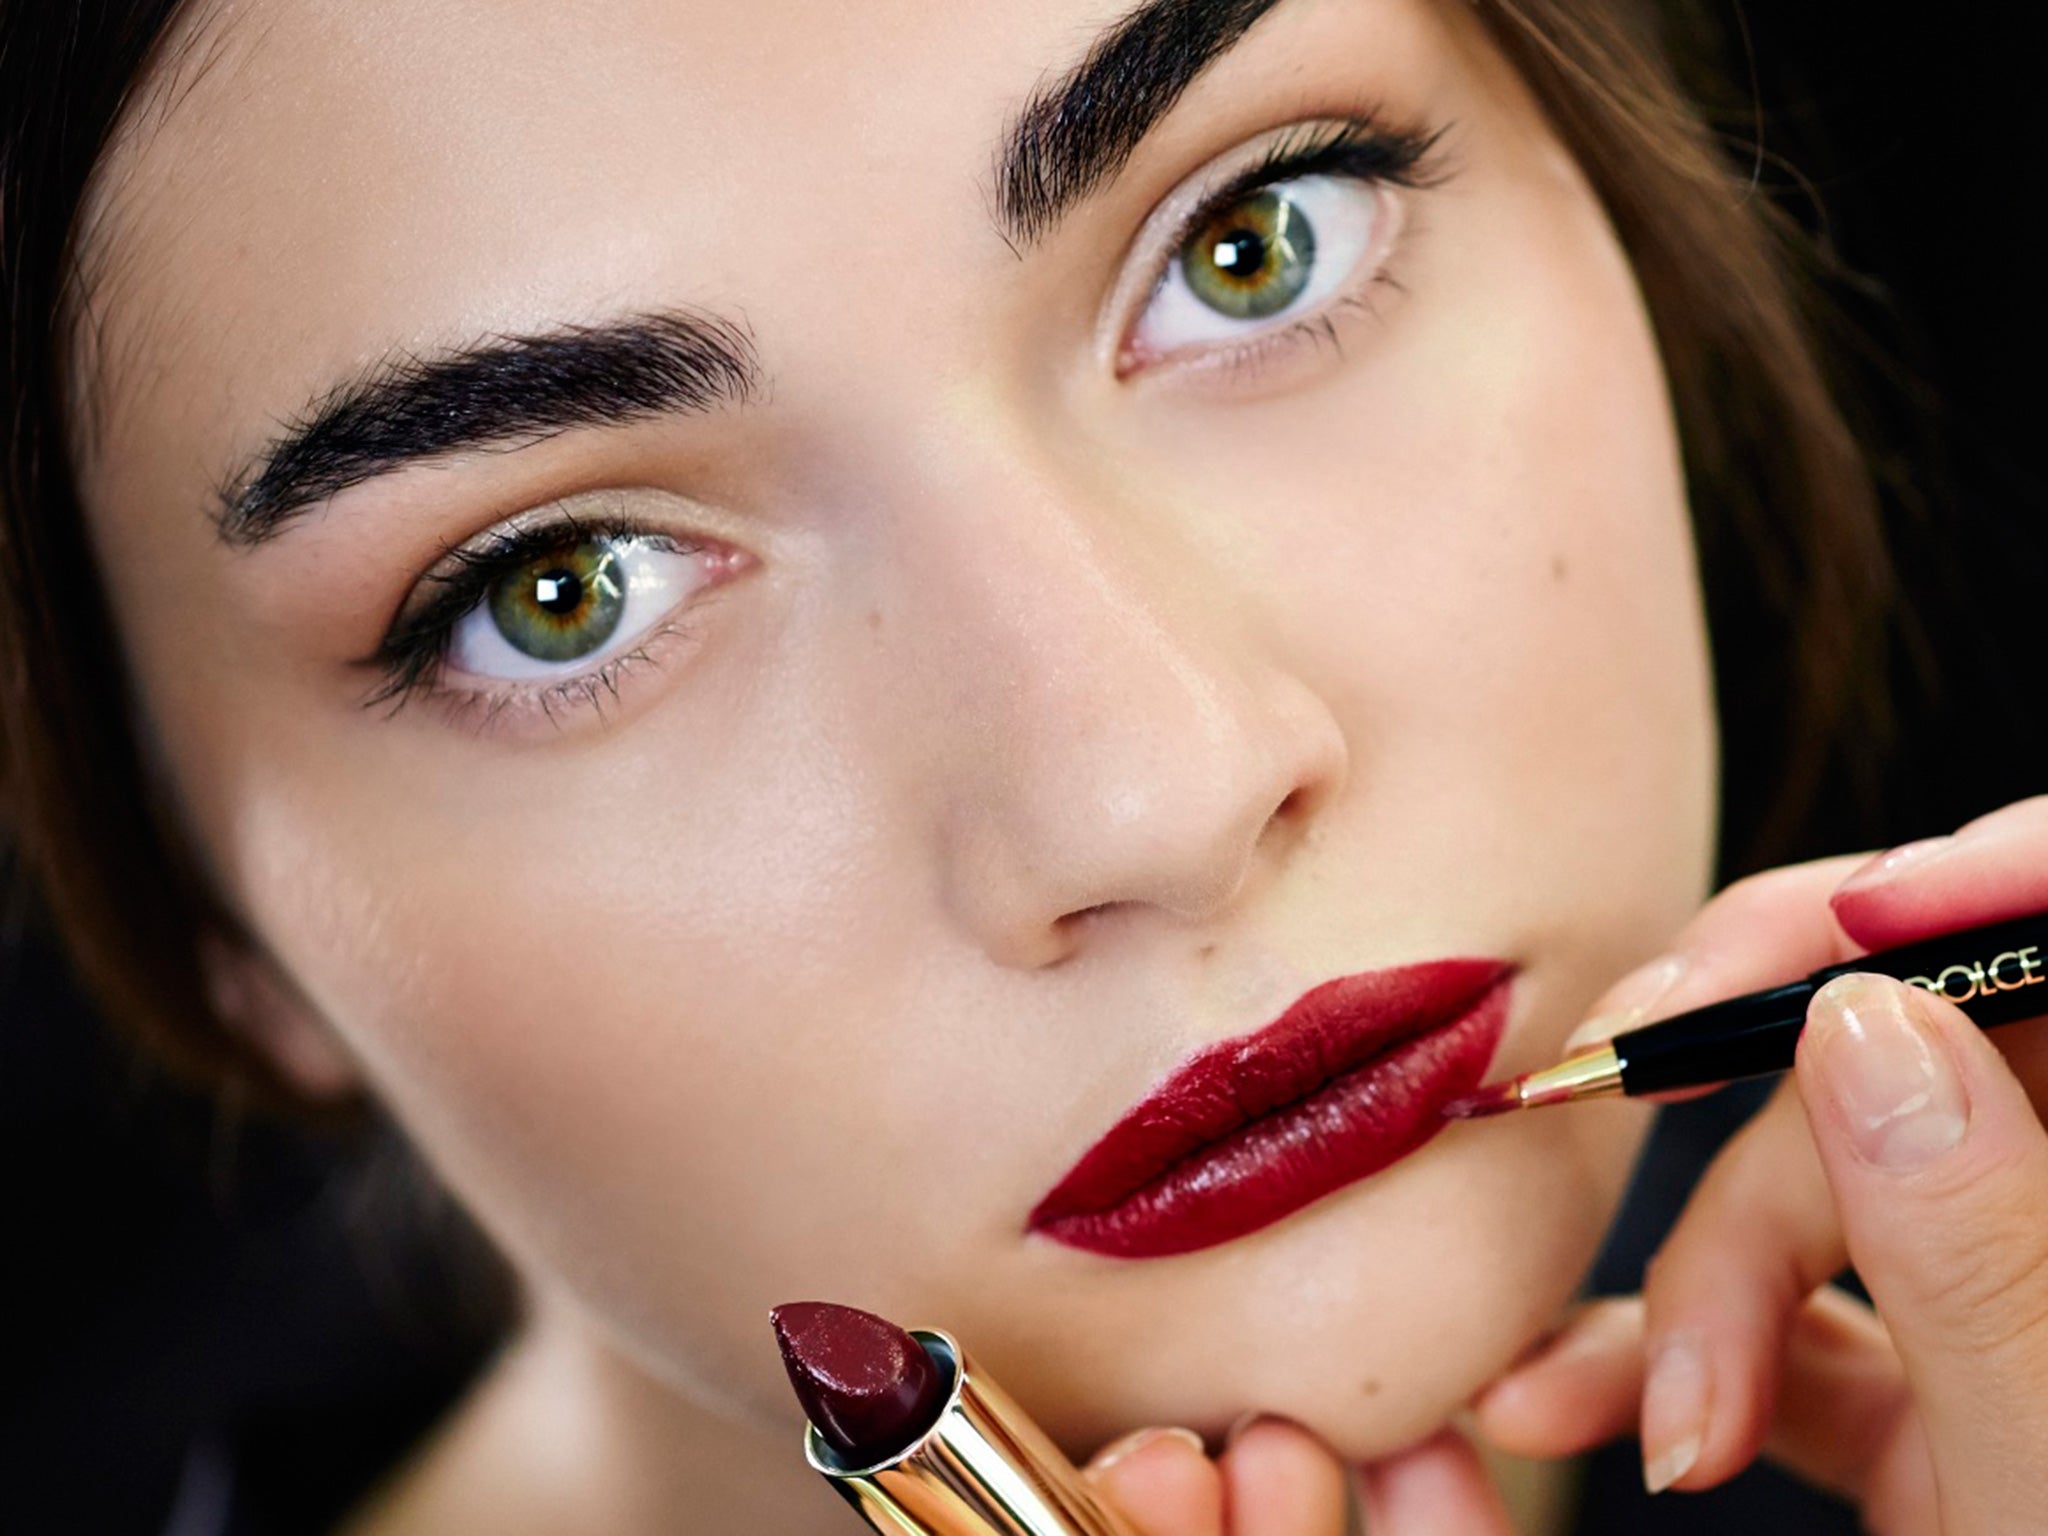 It's time for a make-up makeover for the spring season